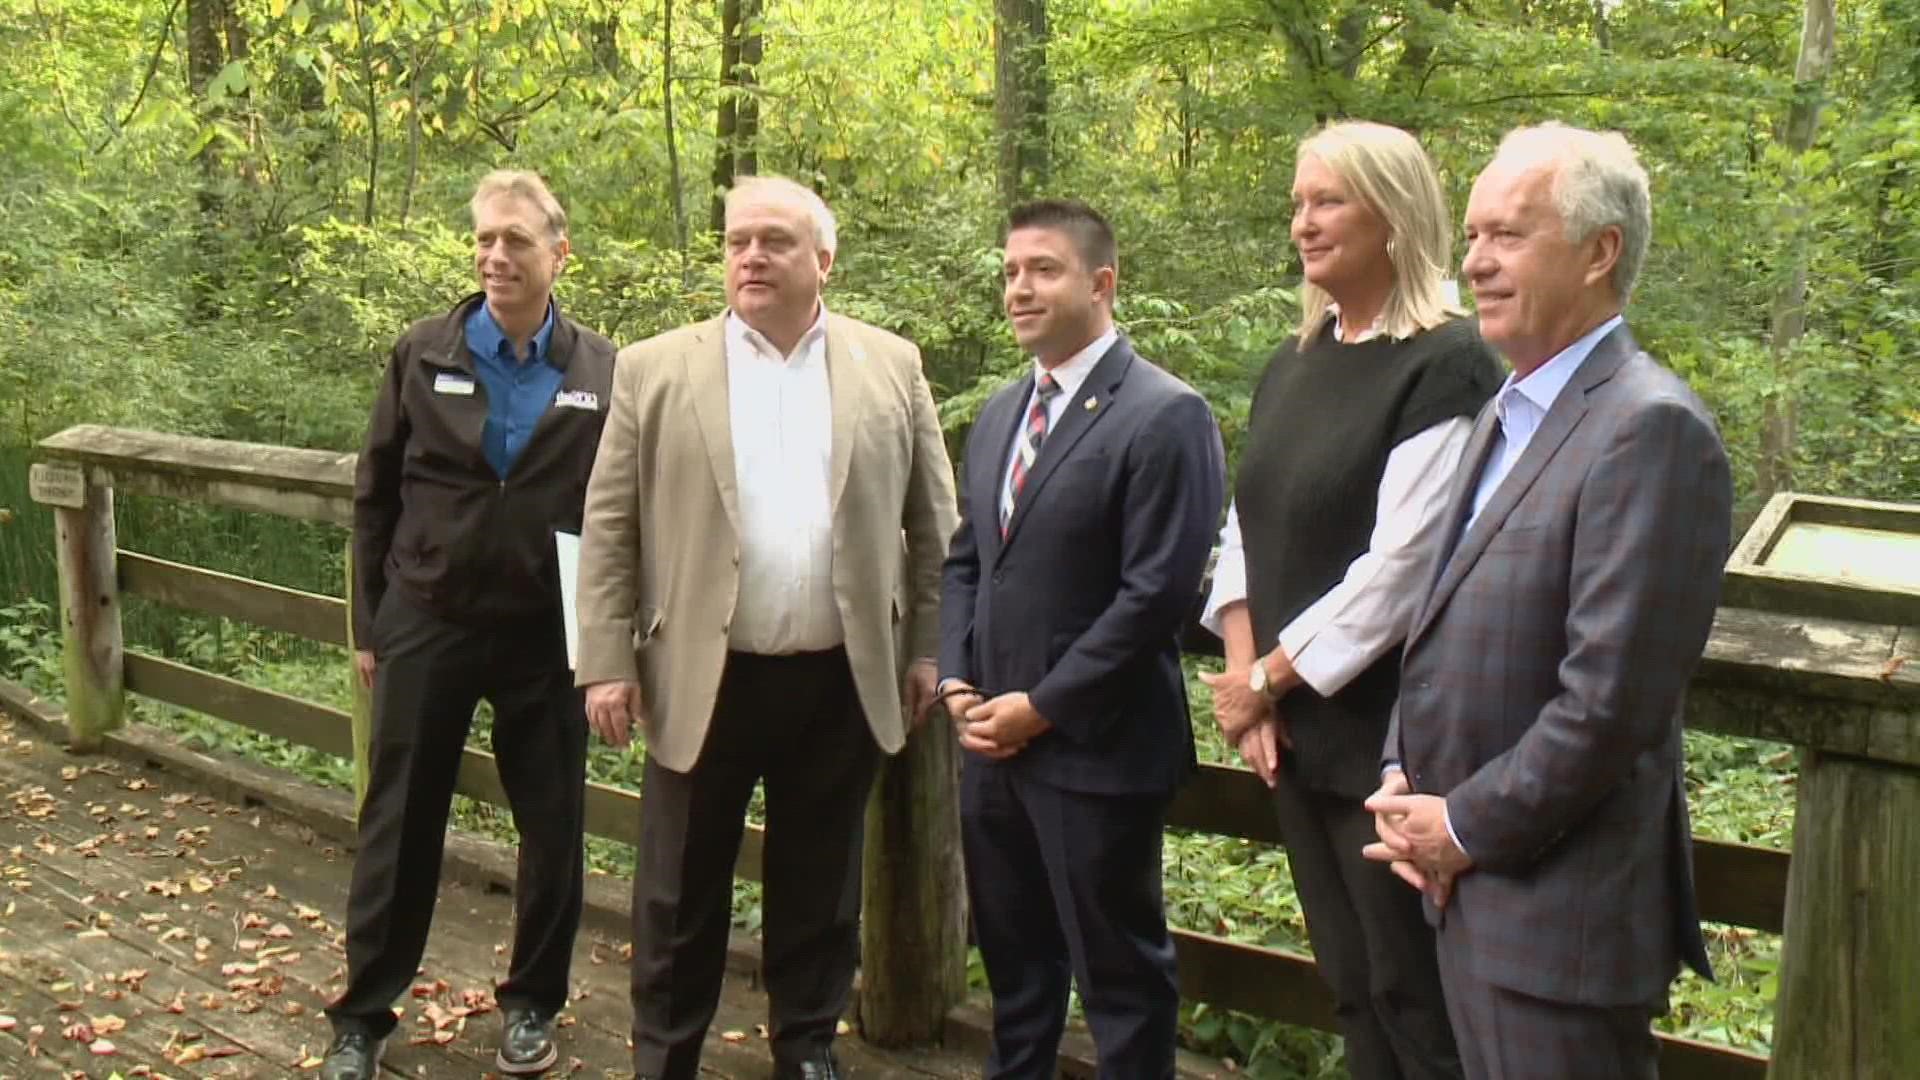 The new area will help preserve and celebrate the wild parts of Kentucky.